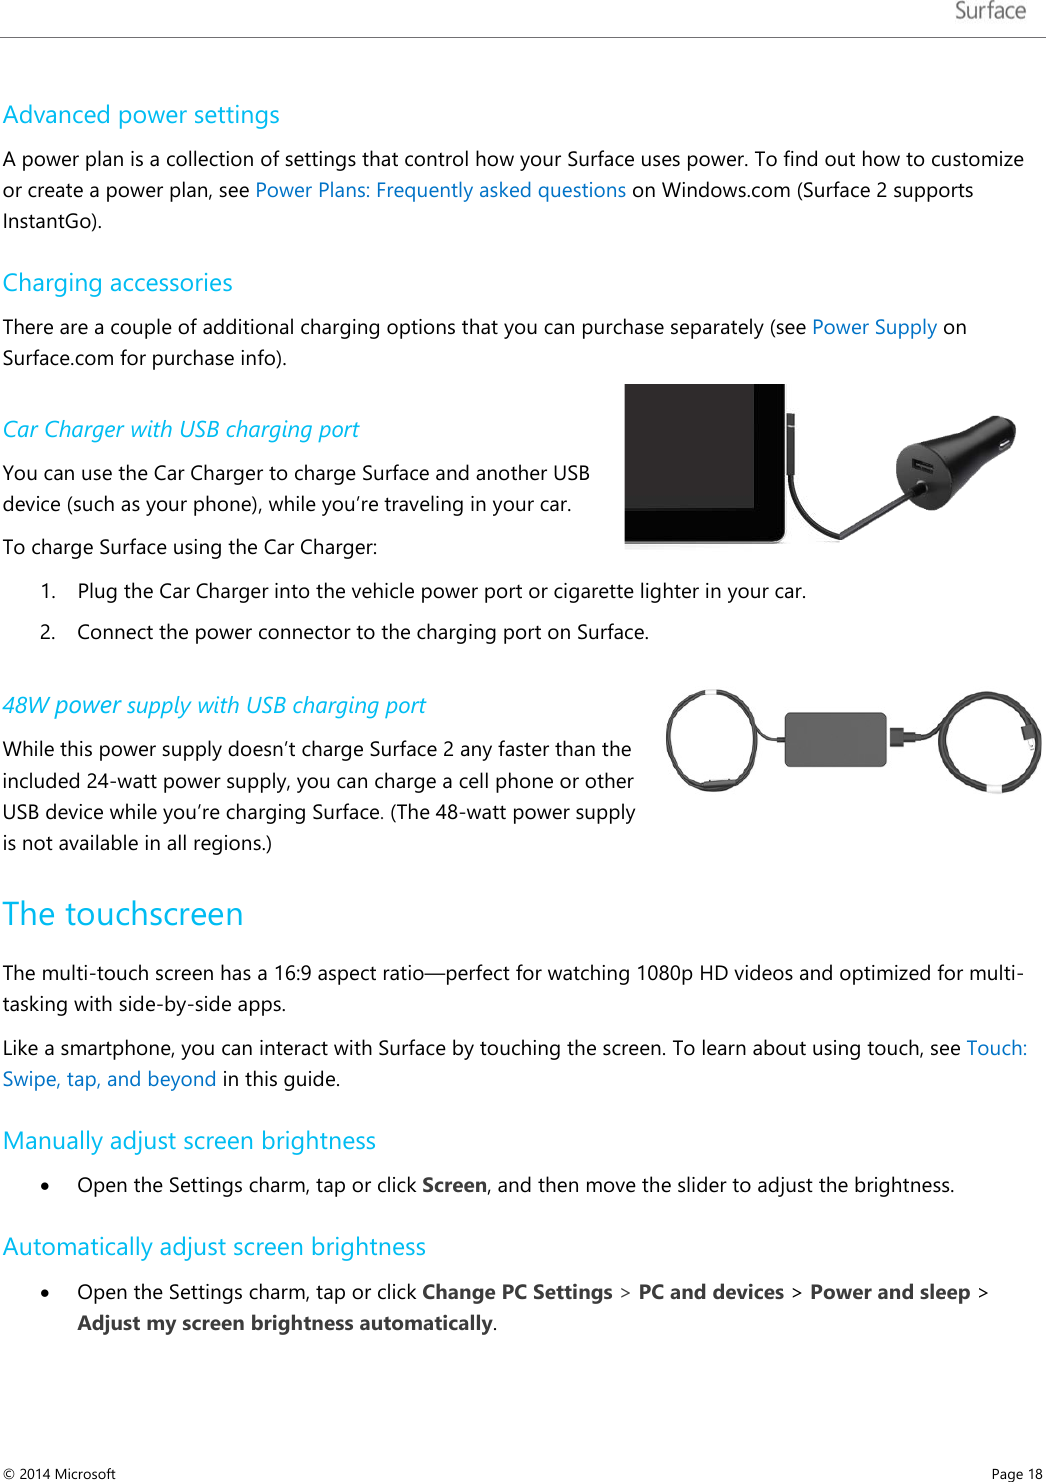   Advanced power settings A power plan is a collection of settings that control how your Surface uses power. To find out how to customize or create a power plan, see Power Plans: Frequently asked questions on Windows.com (Surface 2 supports InstantGo).  Charging accessories There are a couple of additional charging options that you can purchase separately (see Power Supply on Surface.com for purchase info). Car Charger with USB charging port You can use the Car Charger to charge Surface and another USB device (such as your phone), while you’re traveling in your car.  To charge Surface using the Car Charger: 1. Plug the Car Charger into the vehicle power port or cigarette lighter in your car.  2. Connect the power connector to the charging port on Surface. 48W power supply with USB charging port While this power supply doesn’t charge Surface 2 any faster than the included 24-watt power supply, you can charge a cell phone or other USB device while you’re charging Surface. (The 48-watt power supply is not available in all regions.) The touchscreen The multi-touch screen has a 16:9 aspect ratio—perfect for watching 1080p HD videos and optimized for multi-tasking with side-by-side apps.  Like a smartphone, you can interact with Surface by touching the screen. To learn about using touch, see Touch: Swipe, tap, and beyond in this guide. Manually adjust screen brightness  • Open the Settings charm, tap or click Screen, and then move the slider to adjust the brightness. Automatically adjust screen brightness • Open the Settings charm, tap or click Change PC Settings &gt; PC and devices &gt; Power and sleep &gt; Adjust my screen brightness automatically. © 2014 Microsoft     Page 18  